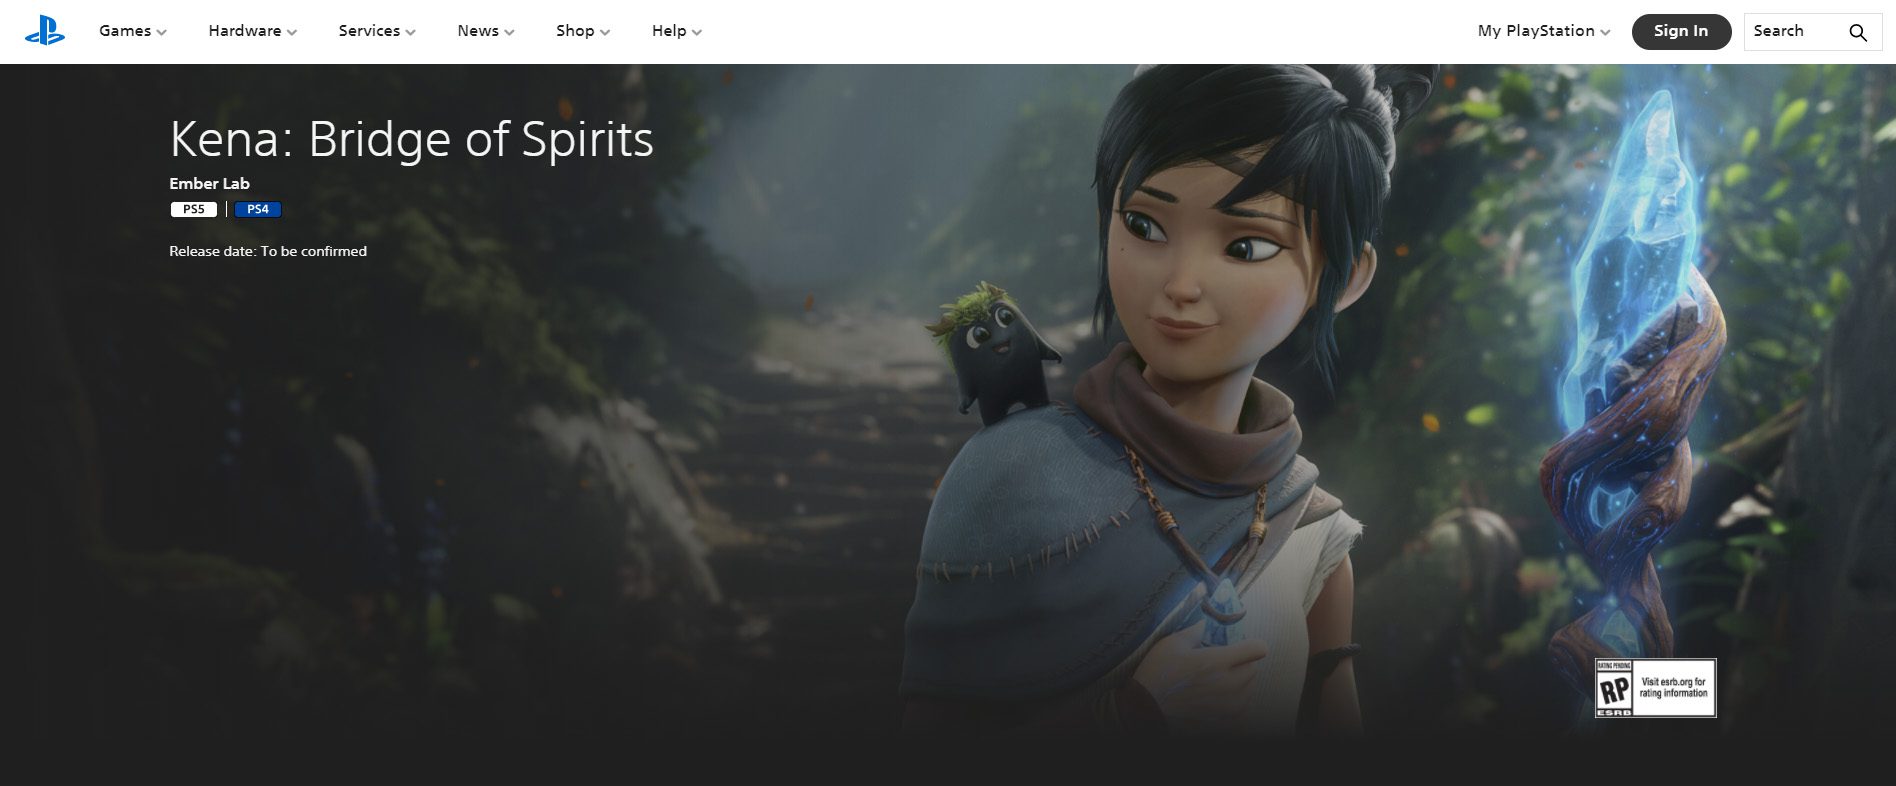 Kena: Bridge of Spirits Delayed To Q4 2021 According To The PlayStation Site